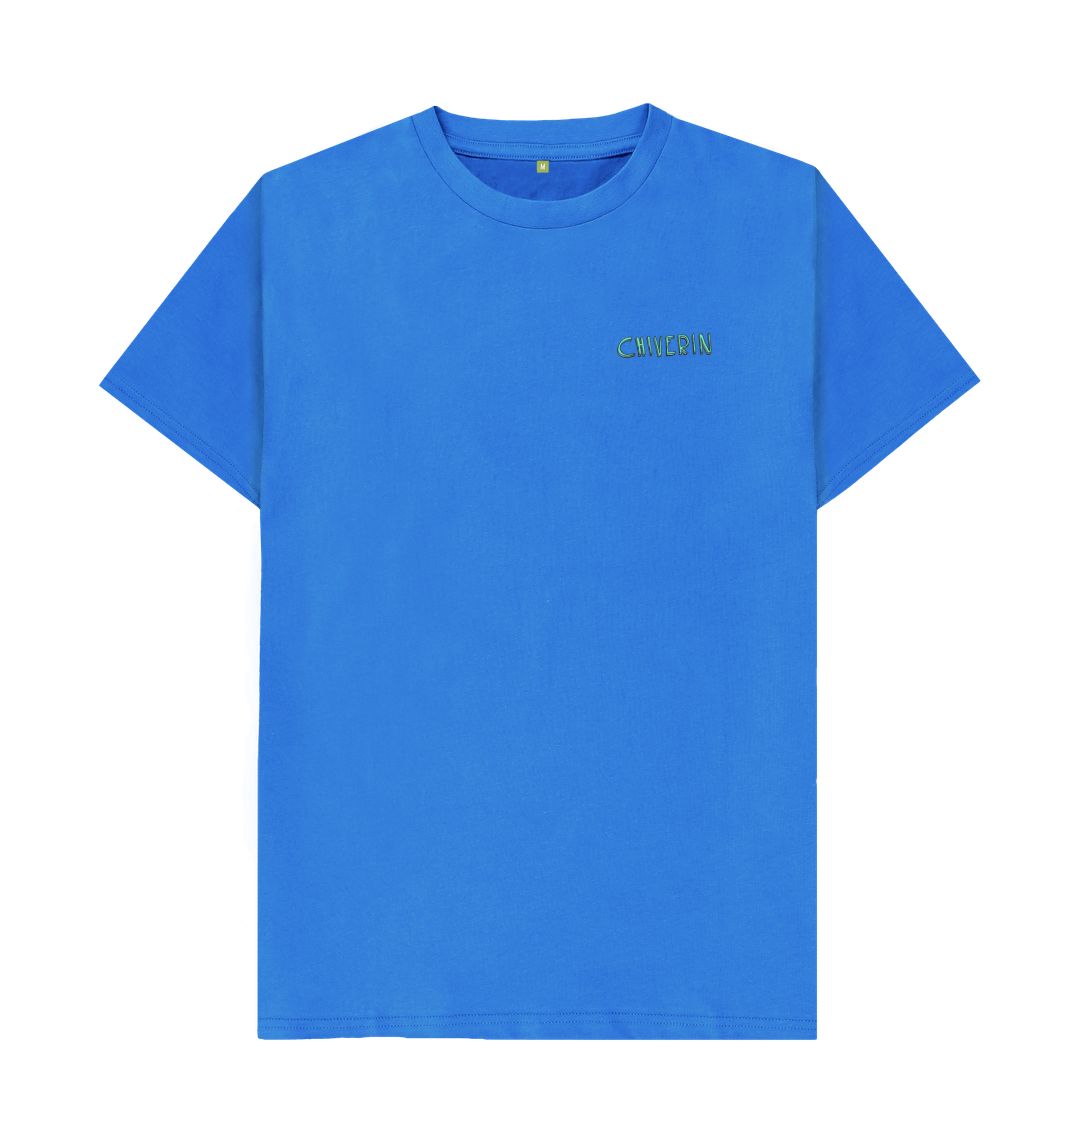 Bright Blue Chiverin Logo Tee